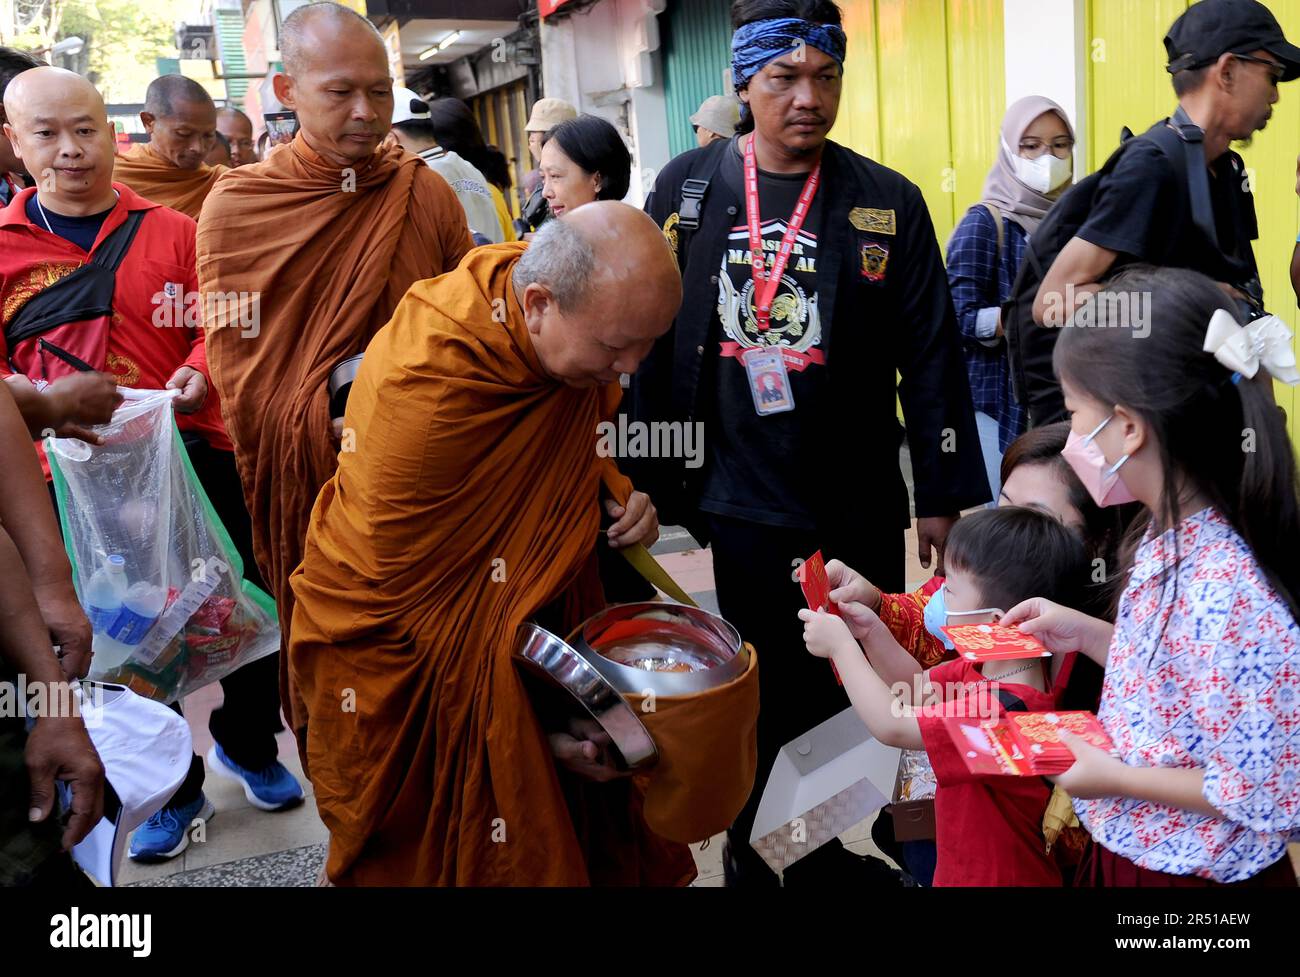 May 31, 2023, Magelang, Central Java, Indonesia: Monks from Thailand, Singapore, Malaysia, Indonesia who perform the Thudong ritual on foot to Borobudur Temple, go for alms at the Liong Hok Bio Temple in Magelang, Central Java, on May 31 2023. In Magelang City, the monks received a friendly welcome from the locals. around waiting on the side of the road for the Pindapata tradition which was stopped for 3 years, Pindapata is a Buddhist tradition of giving alms to monks or priests in the form of food, money, and various daily needs. The 32 monks are scheduled to continue their final journey to B Stock Photo